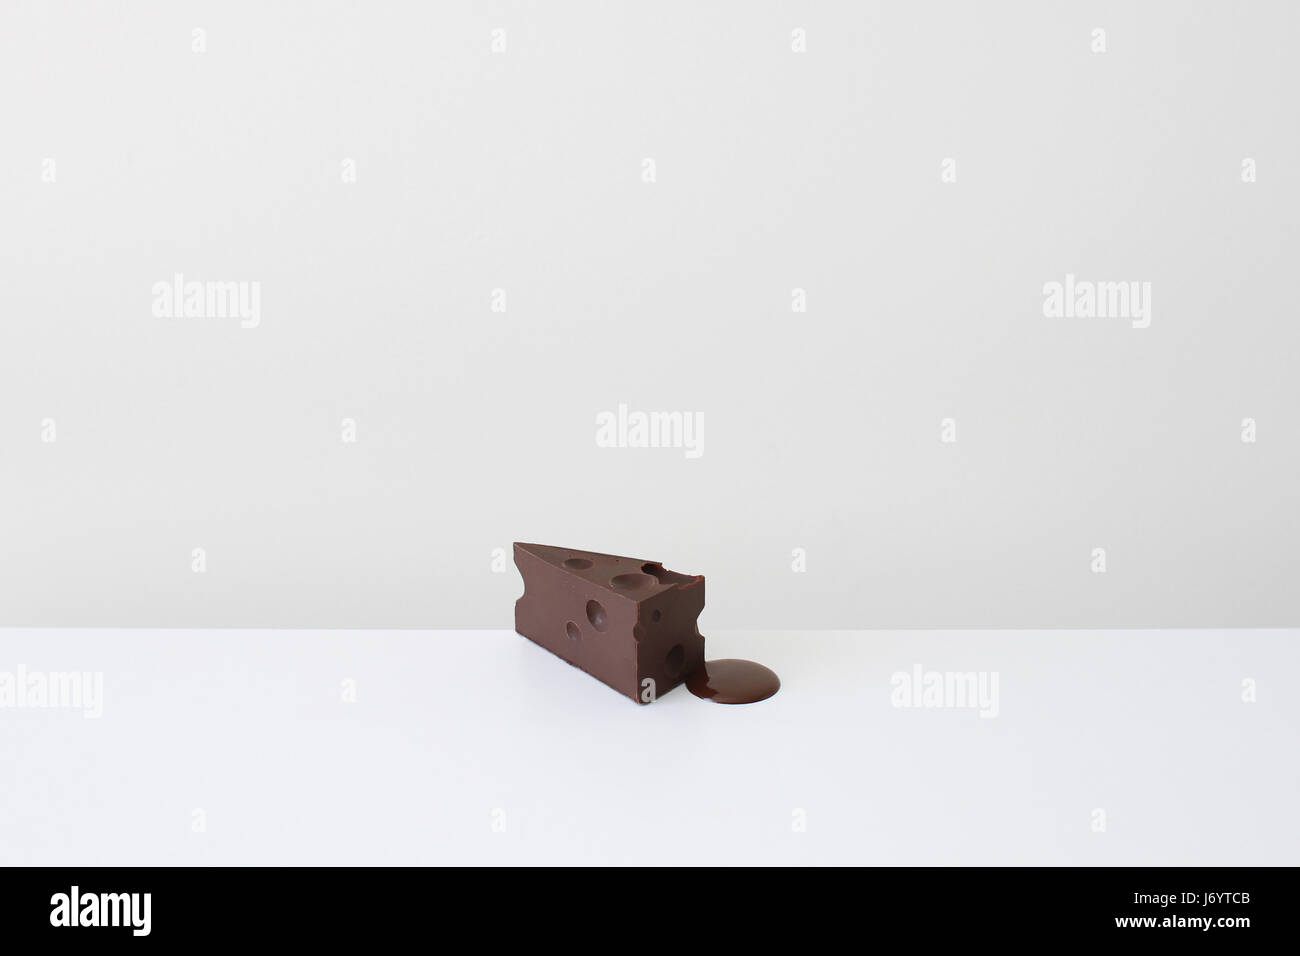 Conceptual slice of cheese shape chocolate melting Stock Photo